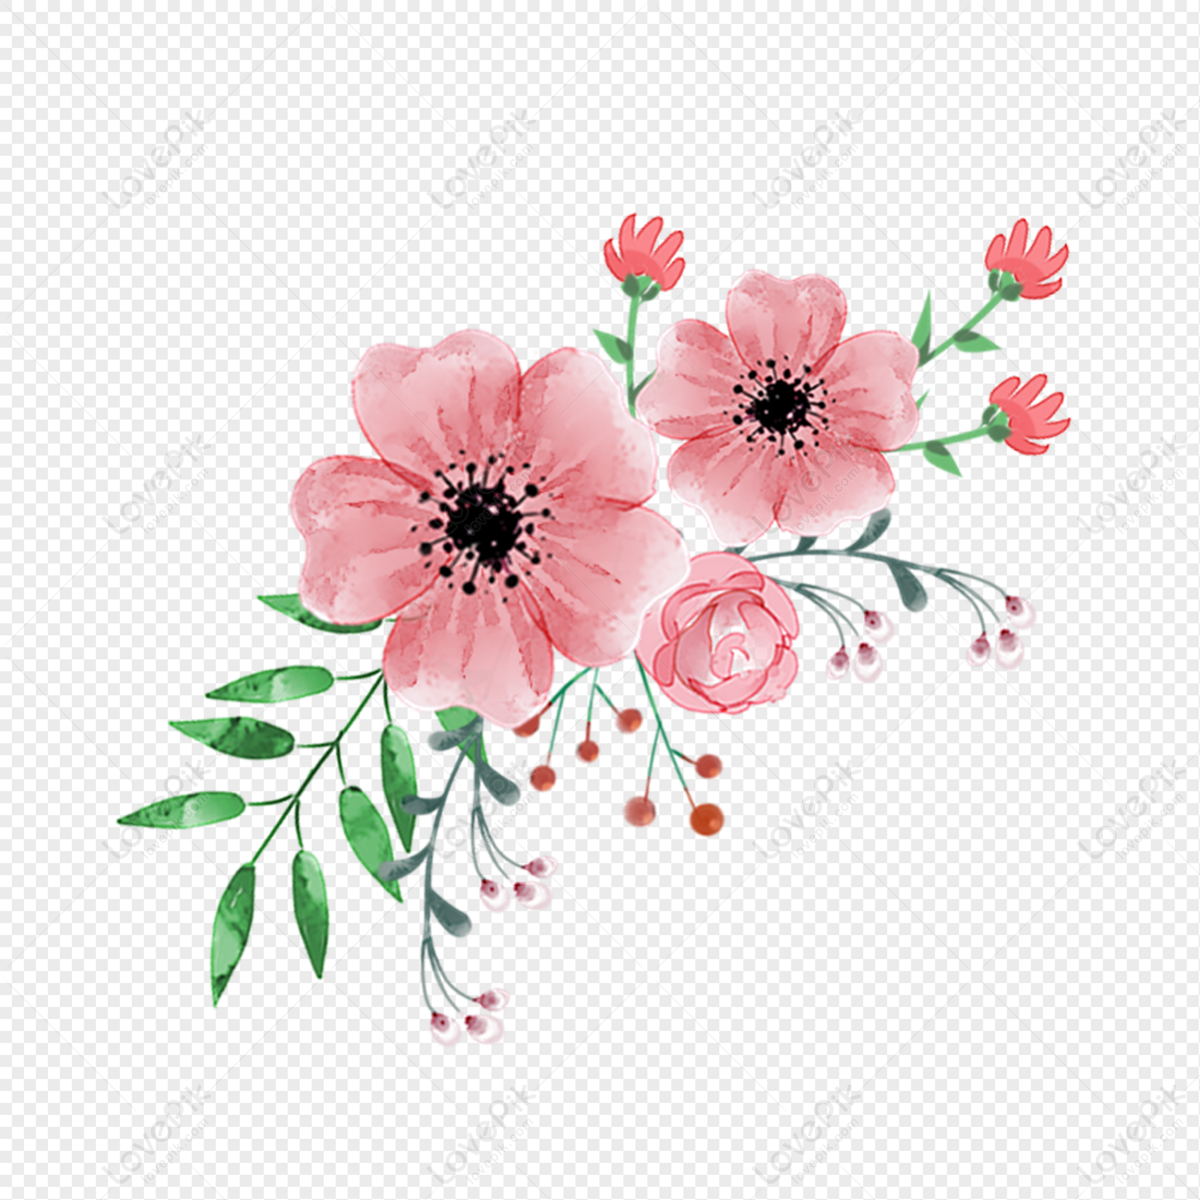 Free Pink Flowers Transparent Background, Download Free Pink